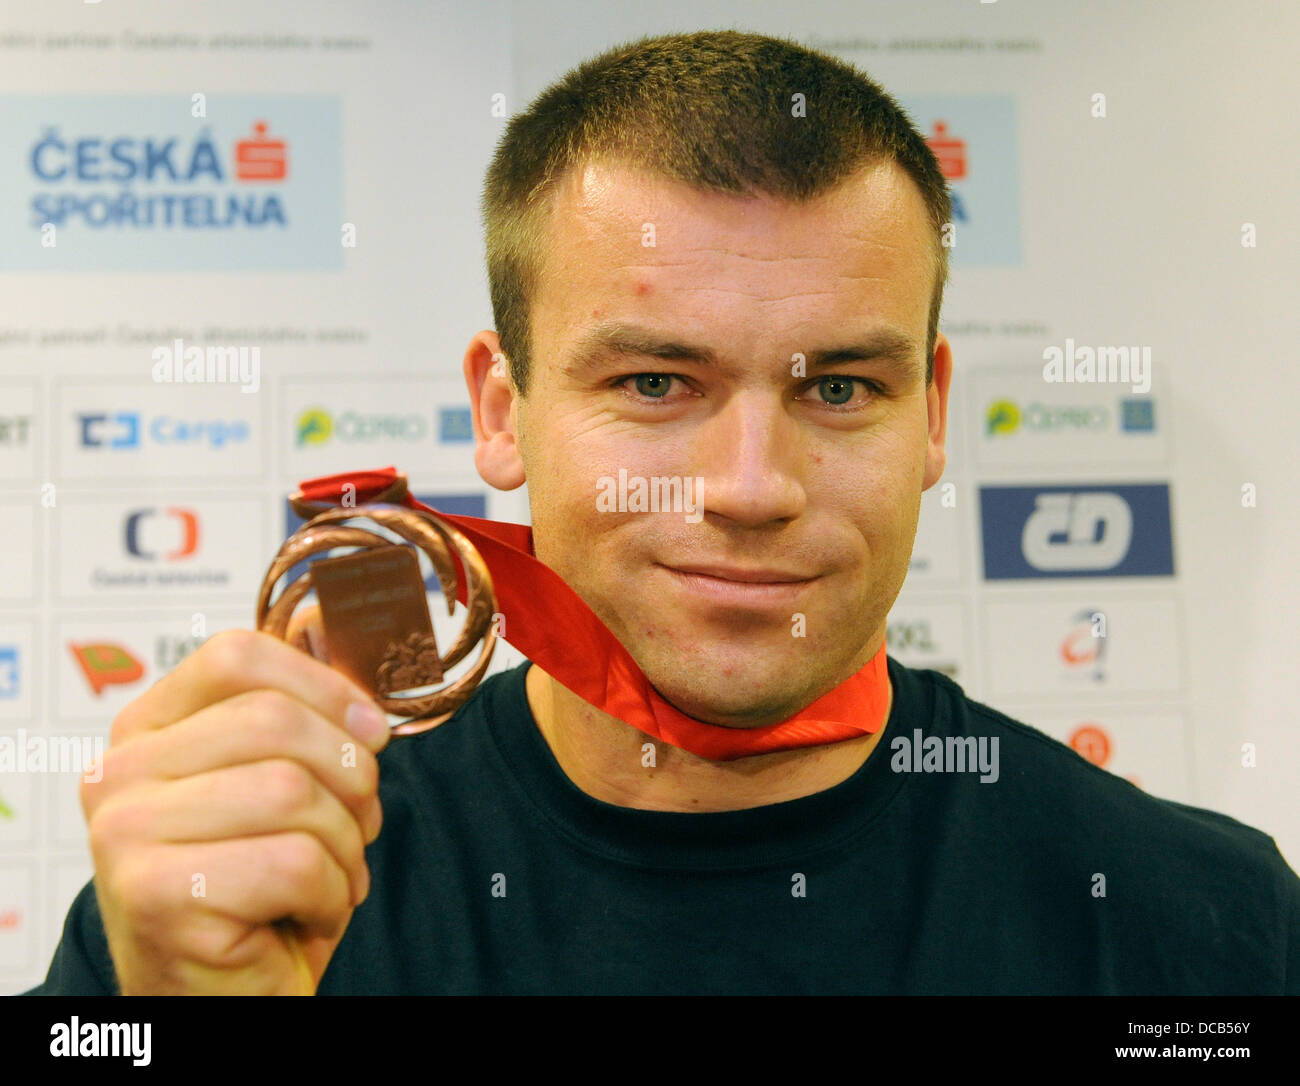 Czech Republic's Lukas Melich poses with his bronze medal for the men's hammer throw from the World Athletics Championships in Prague, Czech Republic, August 14, 2013. (CTK Photo/Stanislav Zbynek) Stock Photo